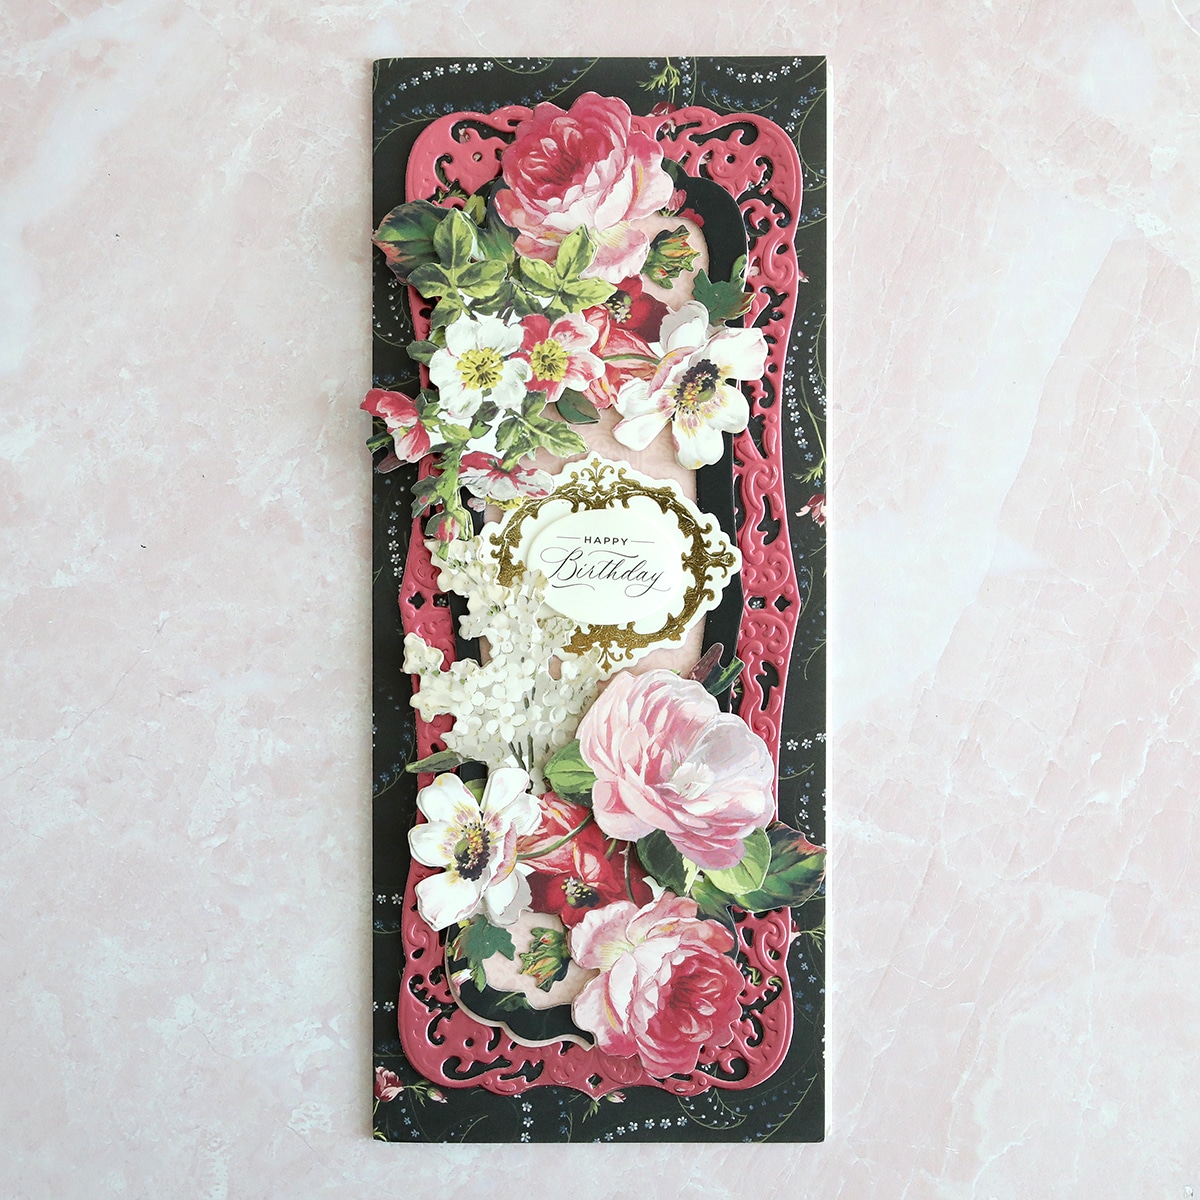 A black and pink card with flowers on it.